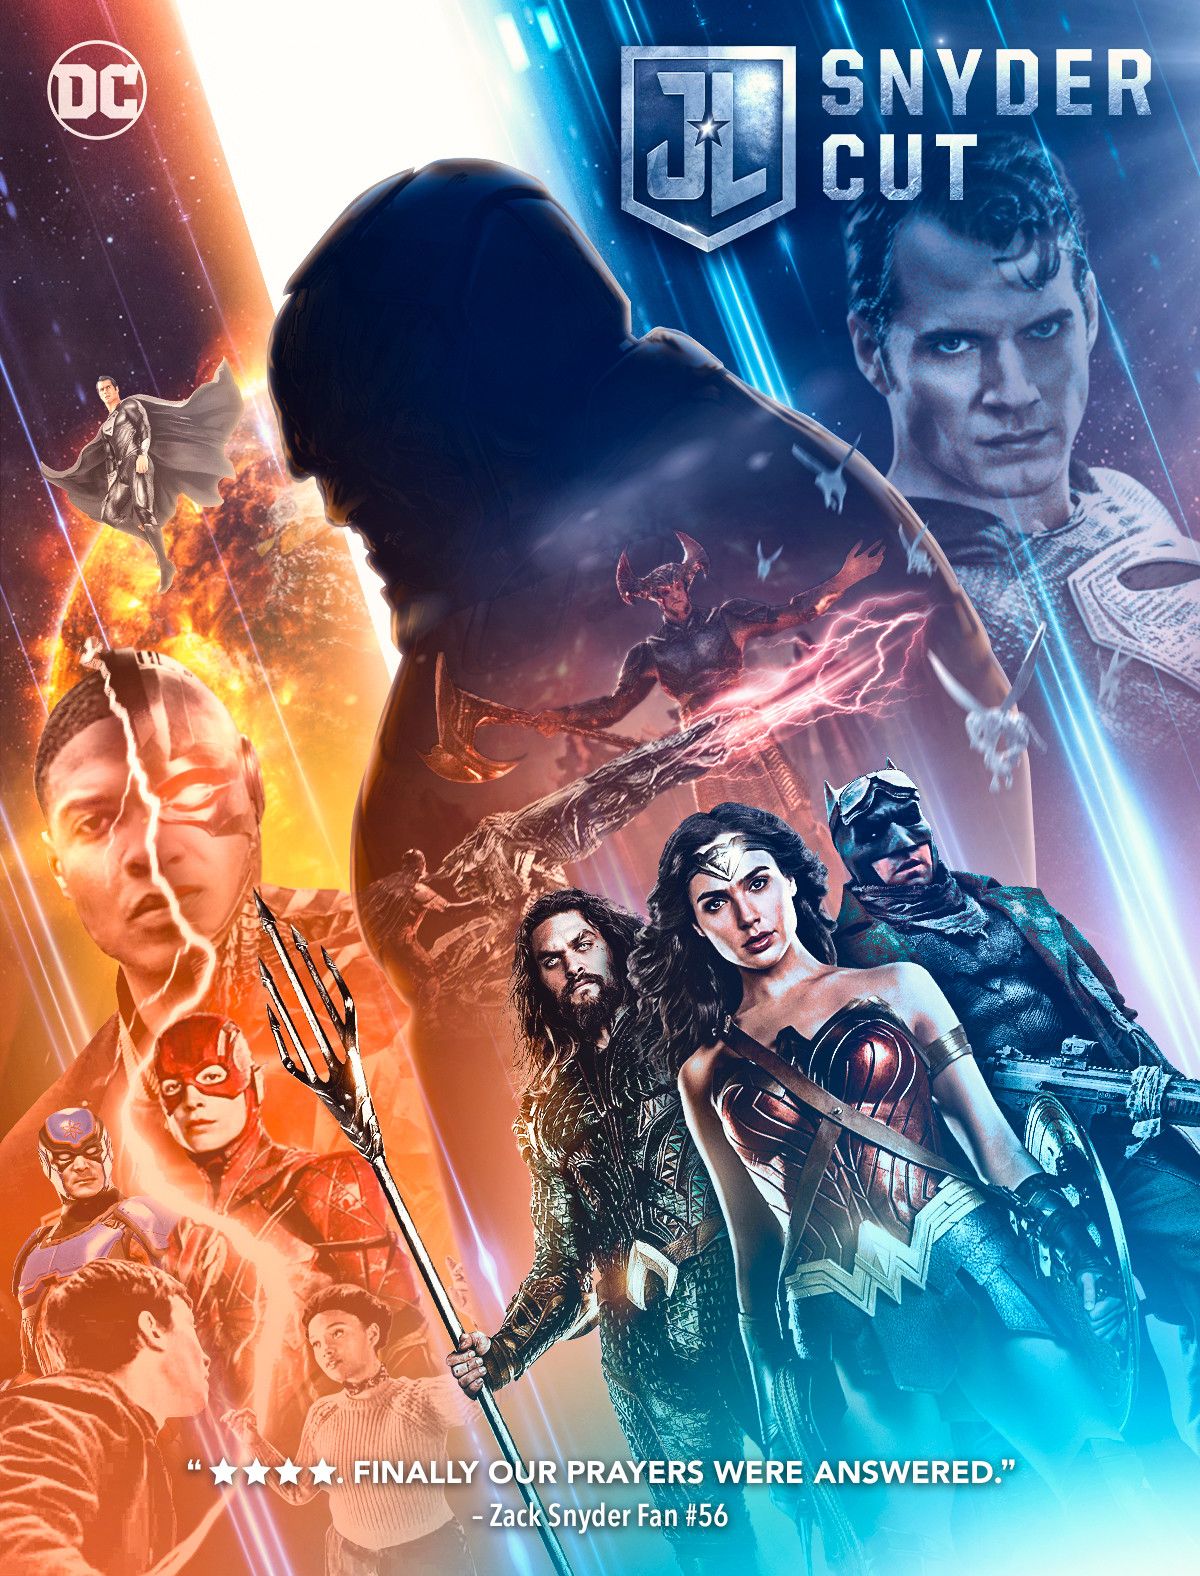 What if we had gotten the Snyder Cut?, Nick Tam